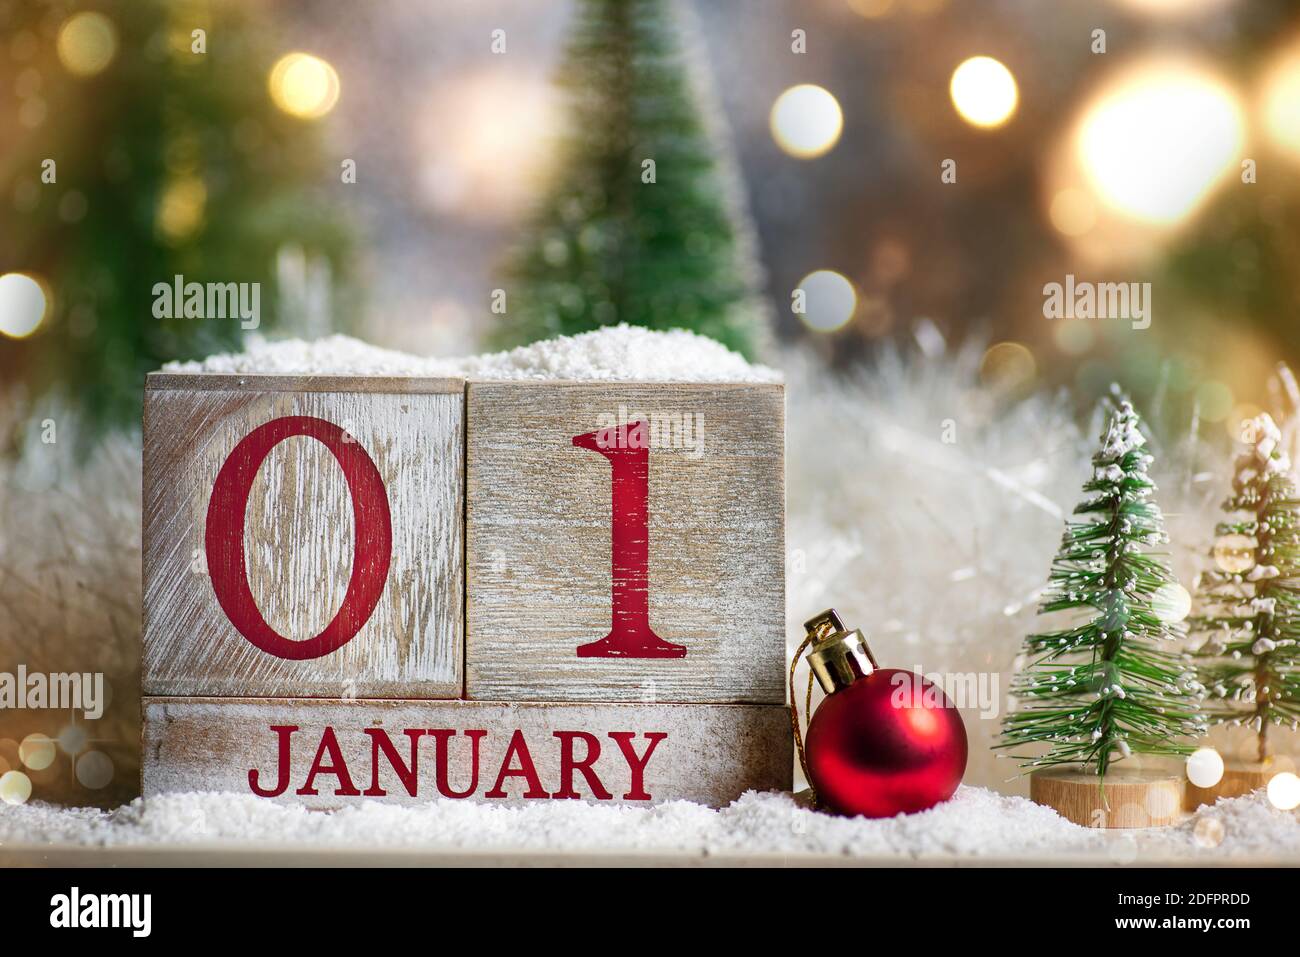 1st January sign for New Year and Christmas tree winter holiday festive background and ornaments Stock Photo